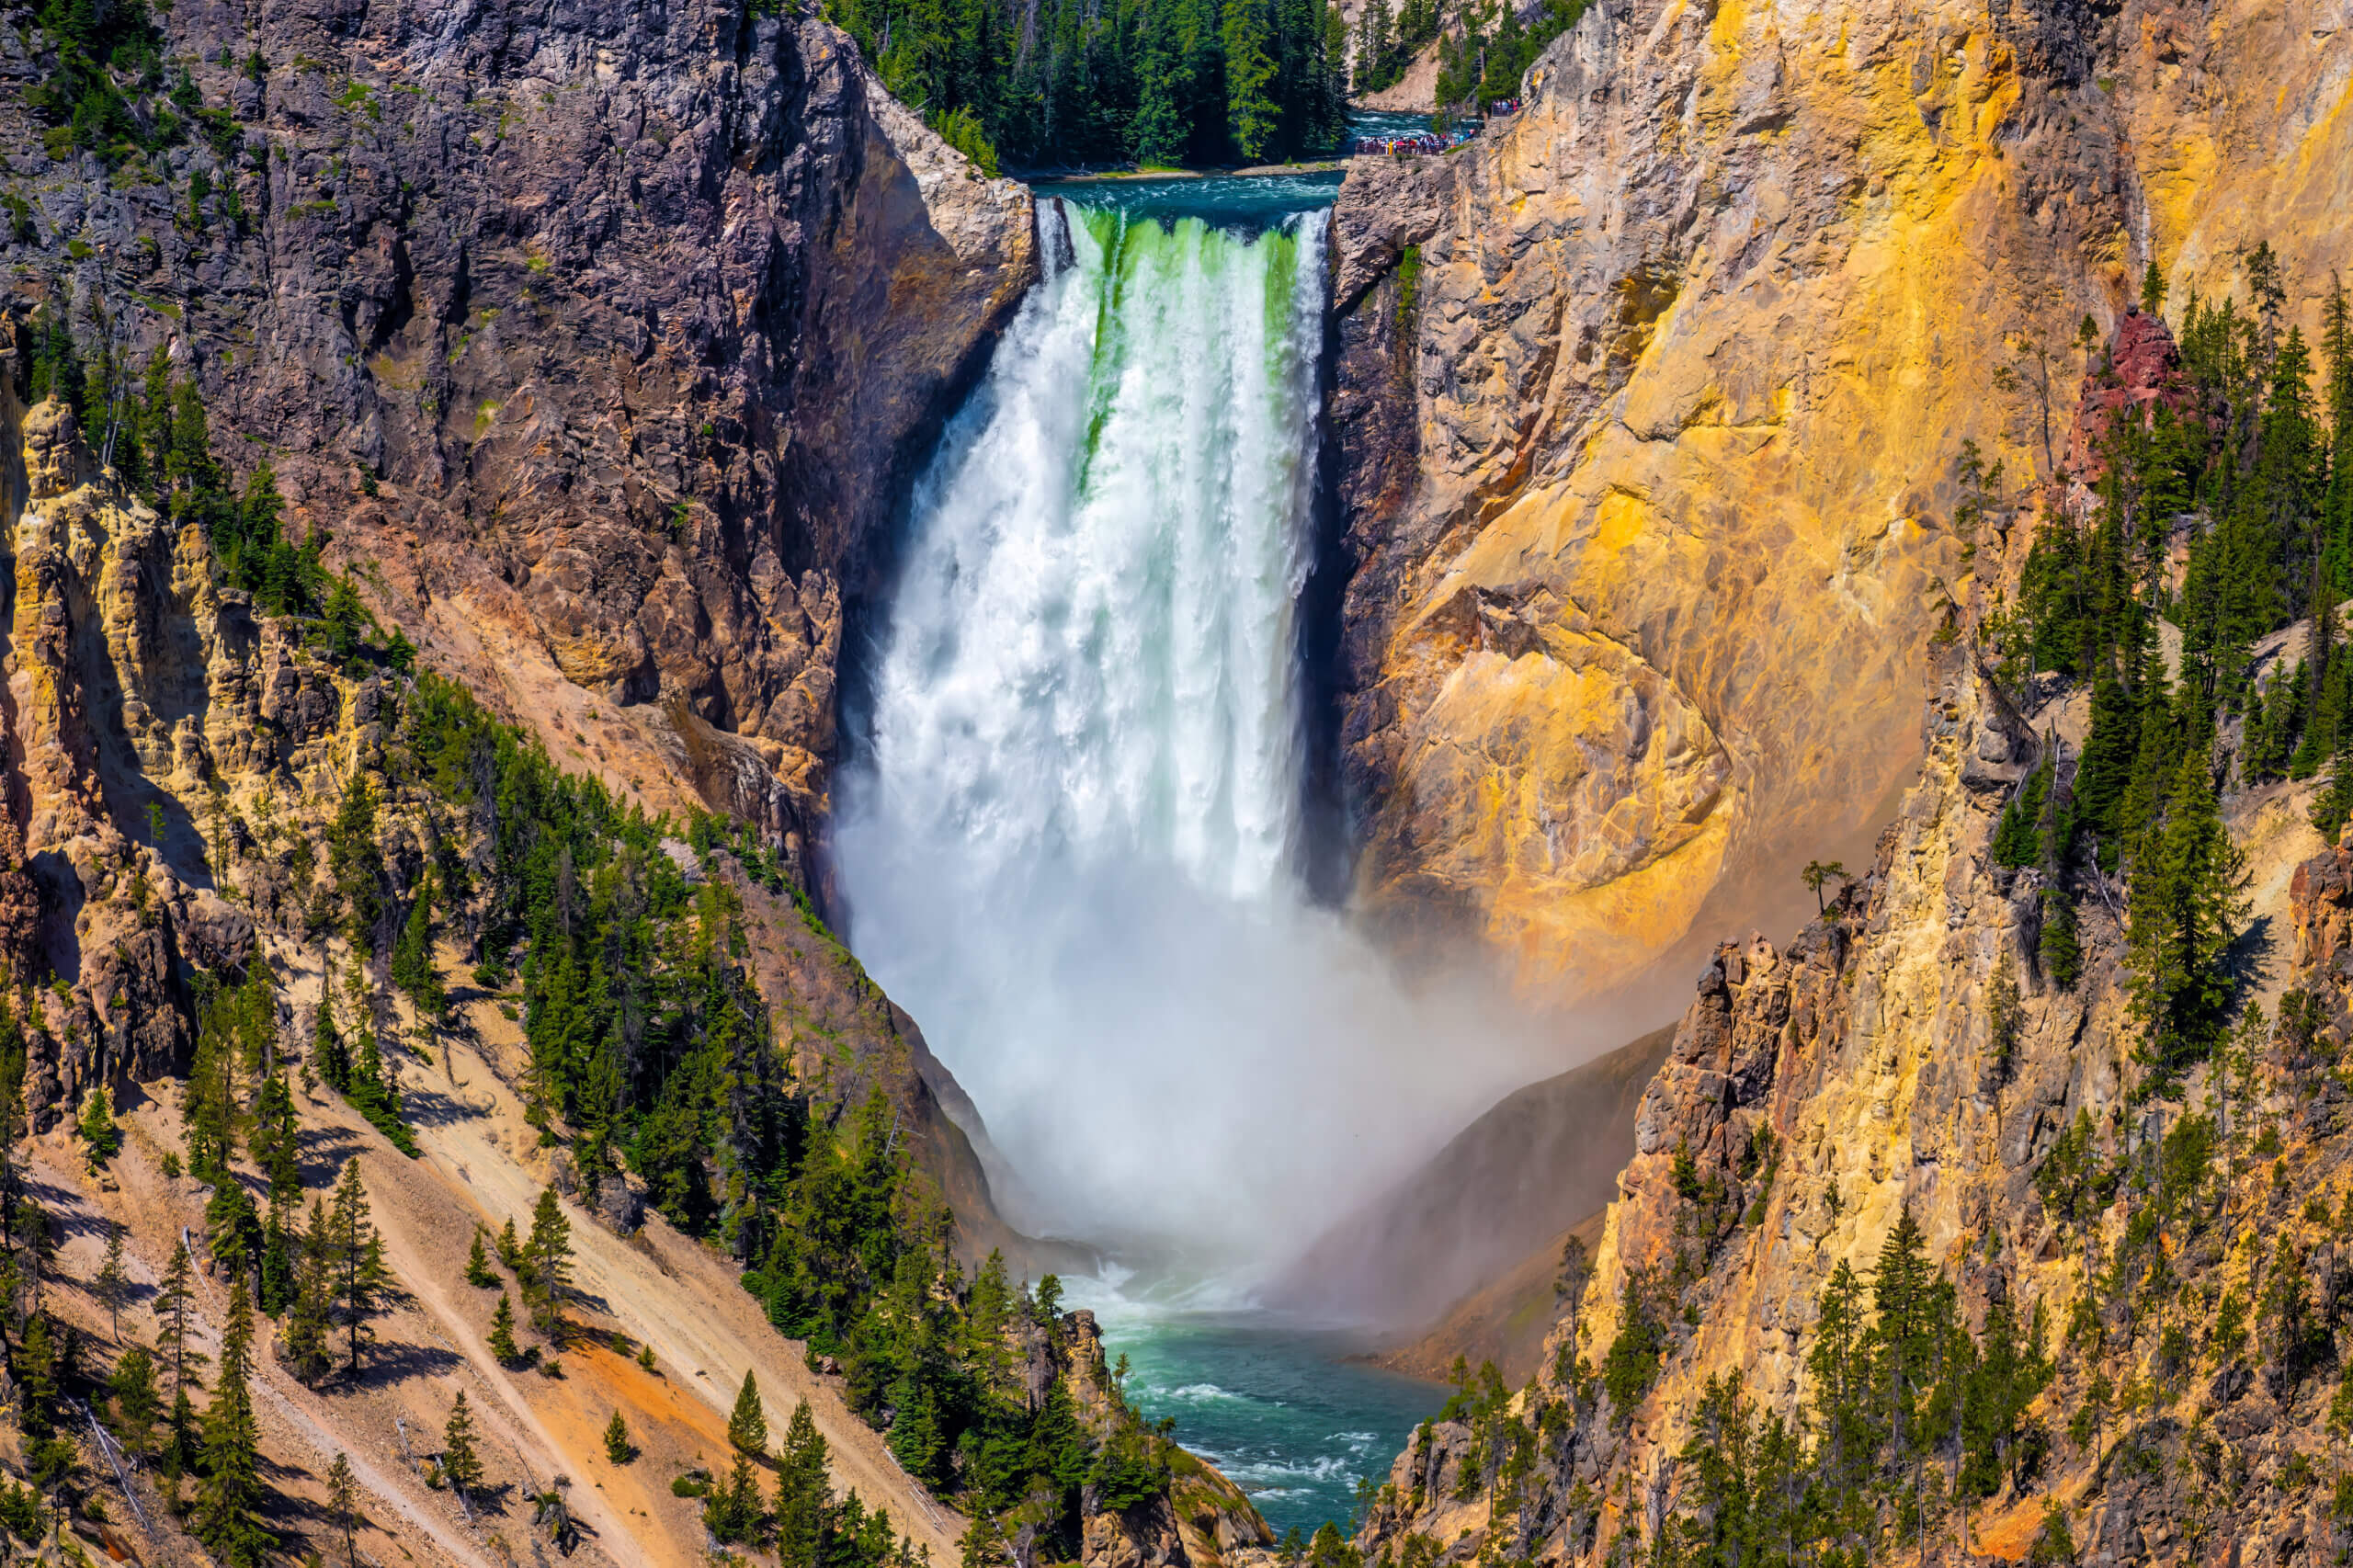 Waterfall Symphony: Upper Falls of the Yellowstone River